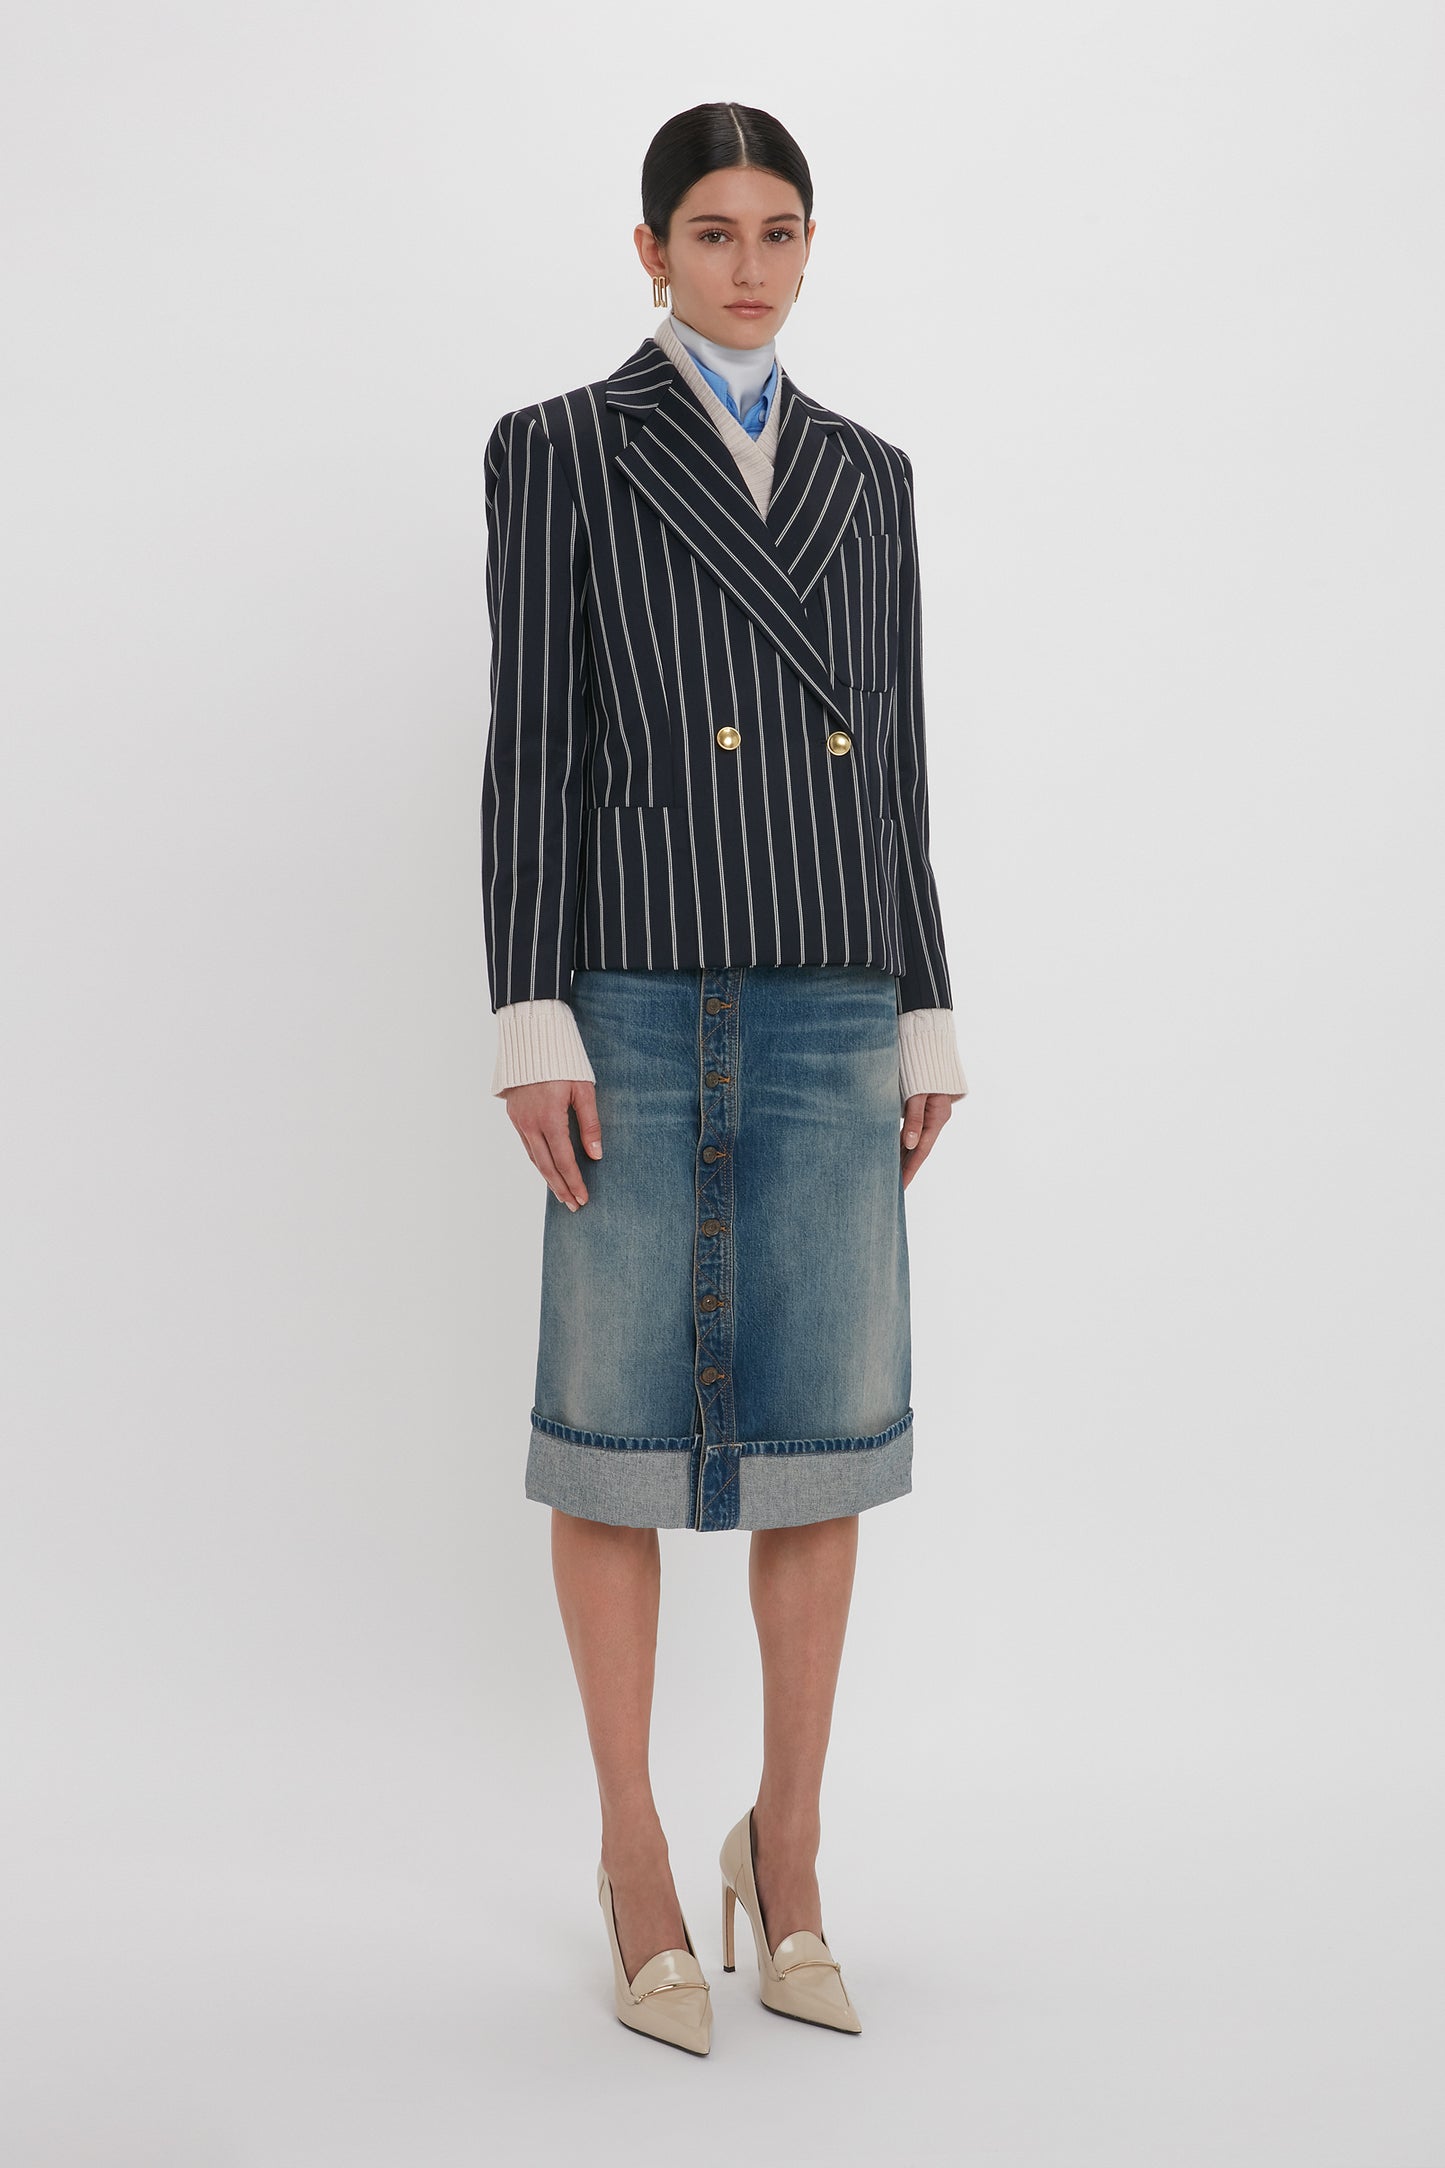 A woman stands against a plain background, wearing a navy pinstripe blazer, a white shirt, a blue necktie, a Placket Detail Denim Skirt In Heavy Vintage Indigo Wash by Victoria Beckham, and beige heels. Her hands are at her sides.